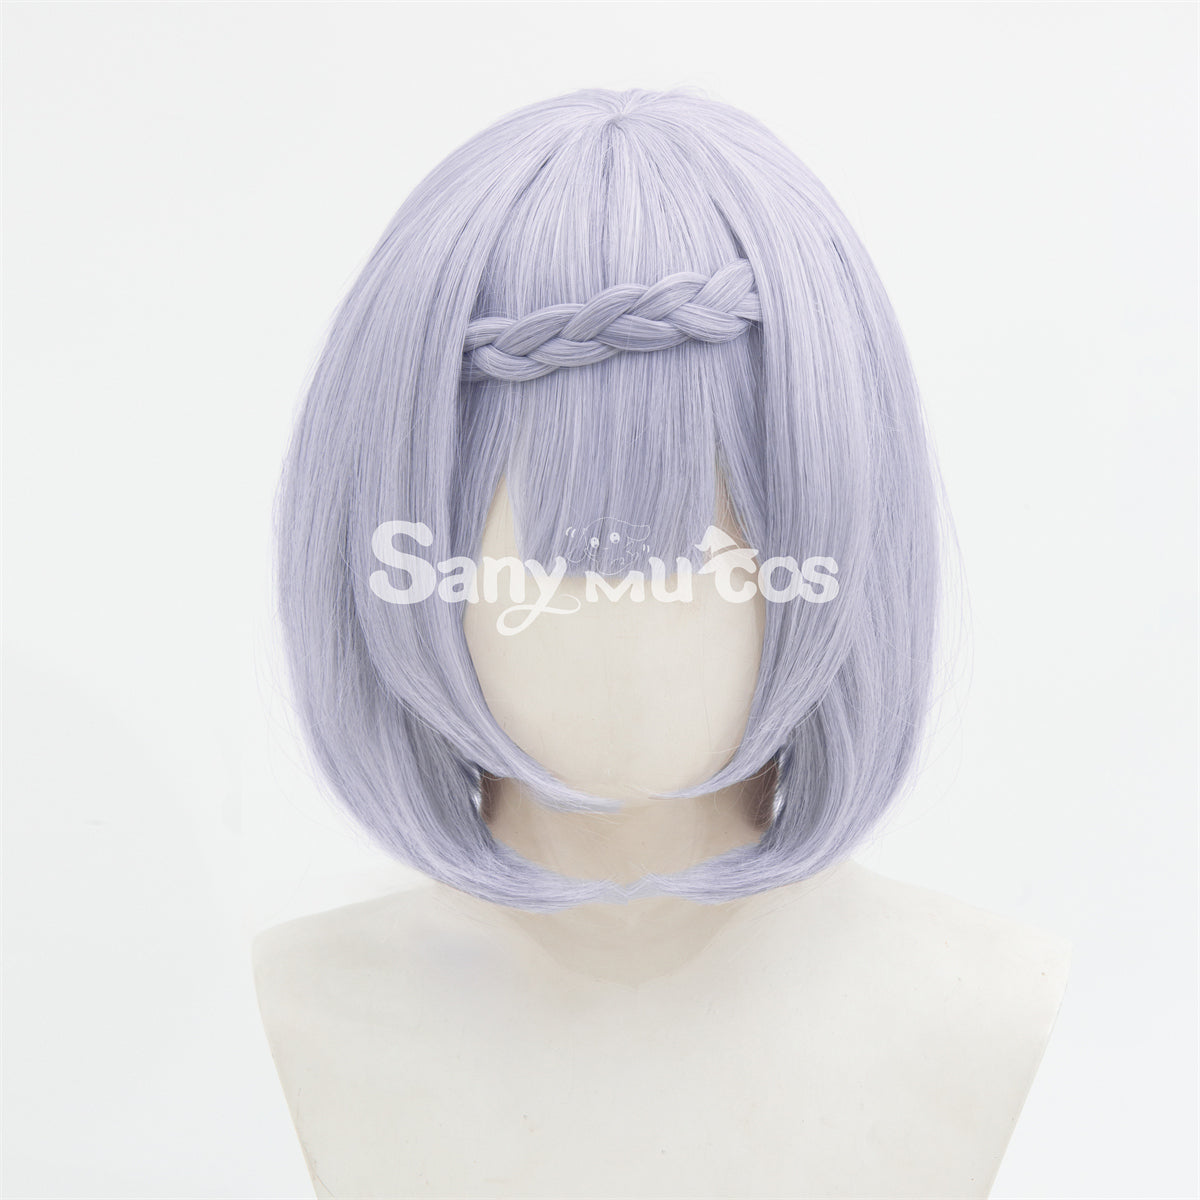 Game Genshin Impact Noelle Chivalric Blossom Cosplay Wig Purple Short Wig